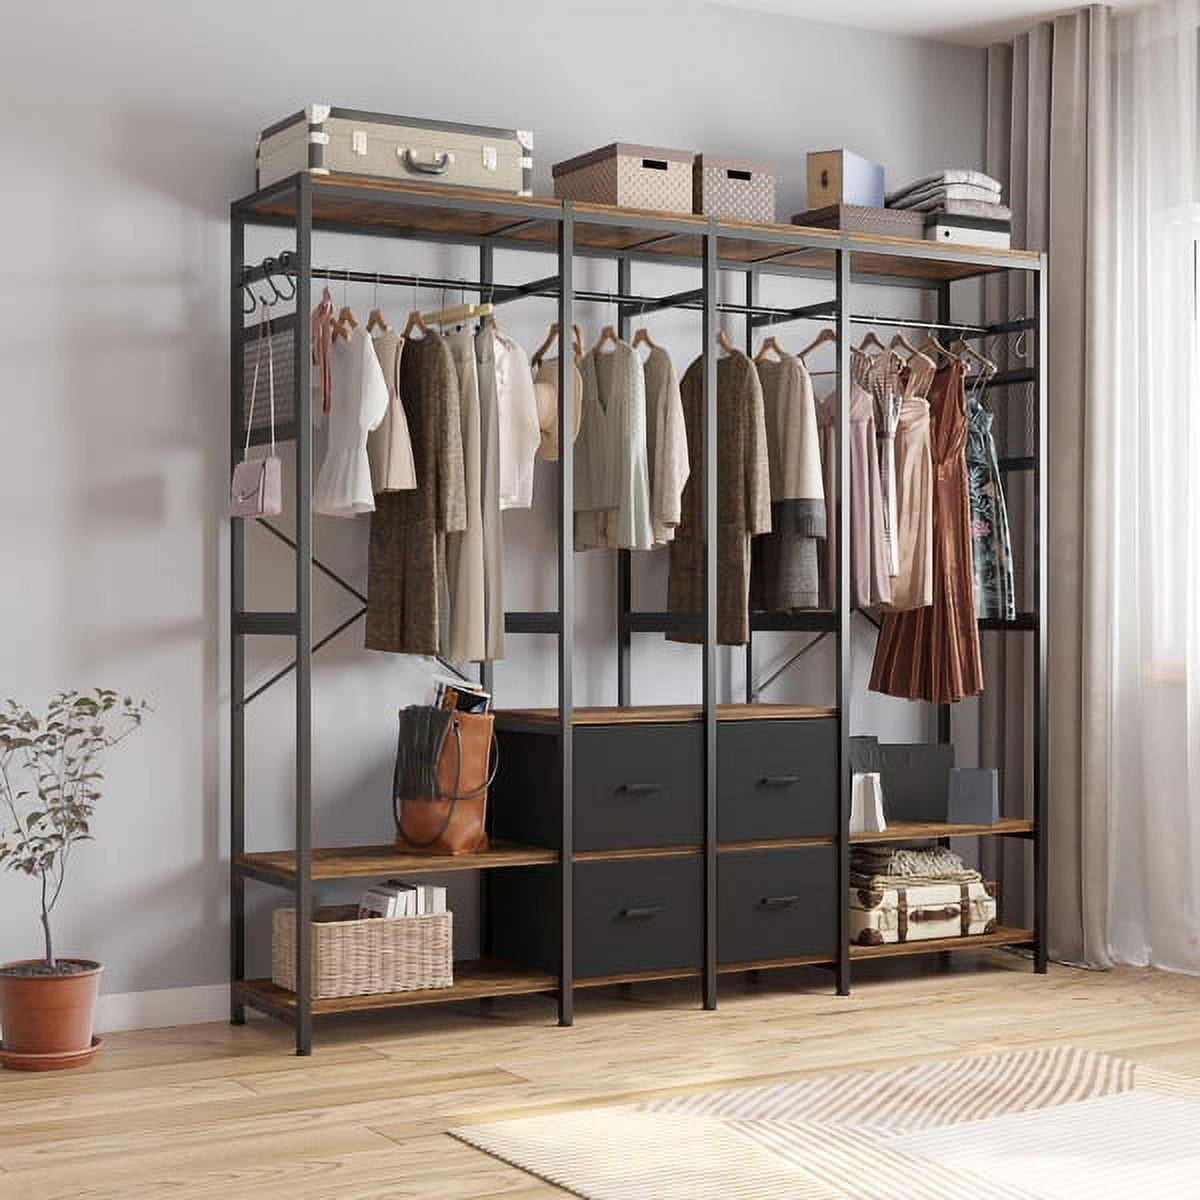 87.2 H Tall Closet System, Walk in Wardrobe Closets with 4 Rattan Drawers  and Shelves Heavy Duty Metal Clothing Storage Organizer Spacious Open